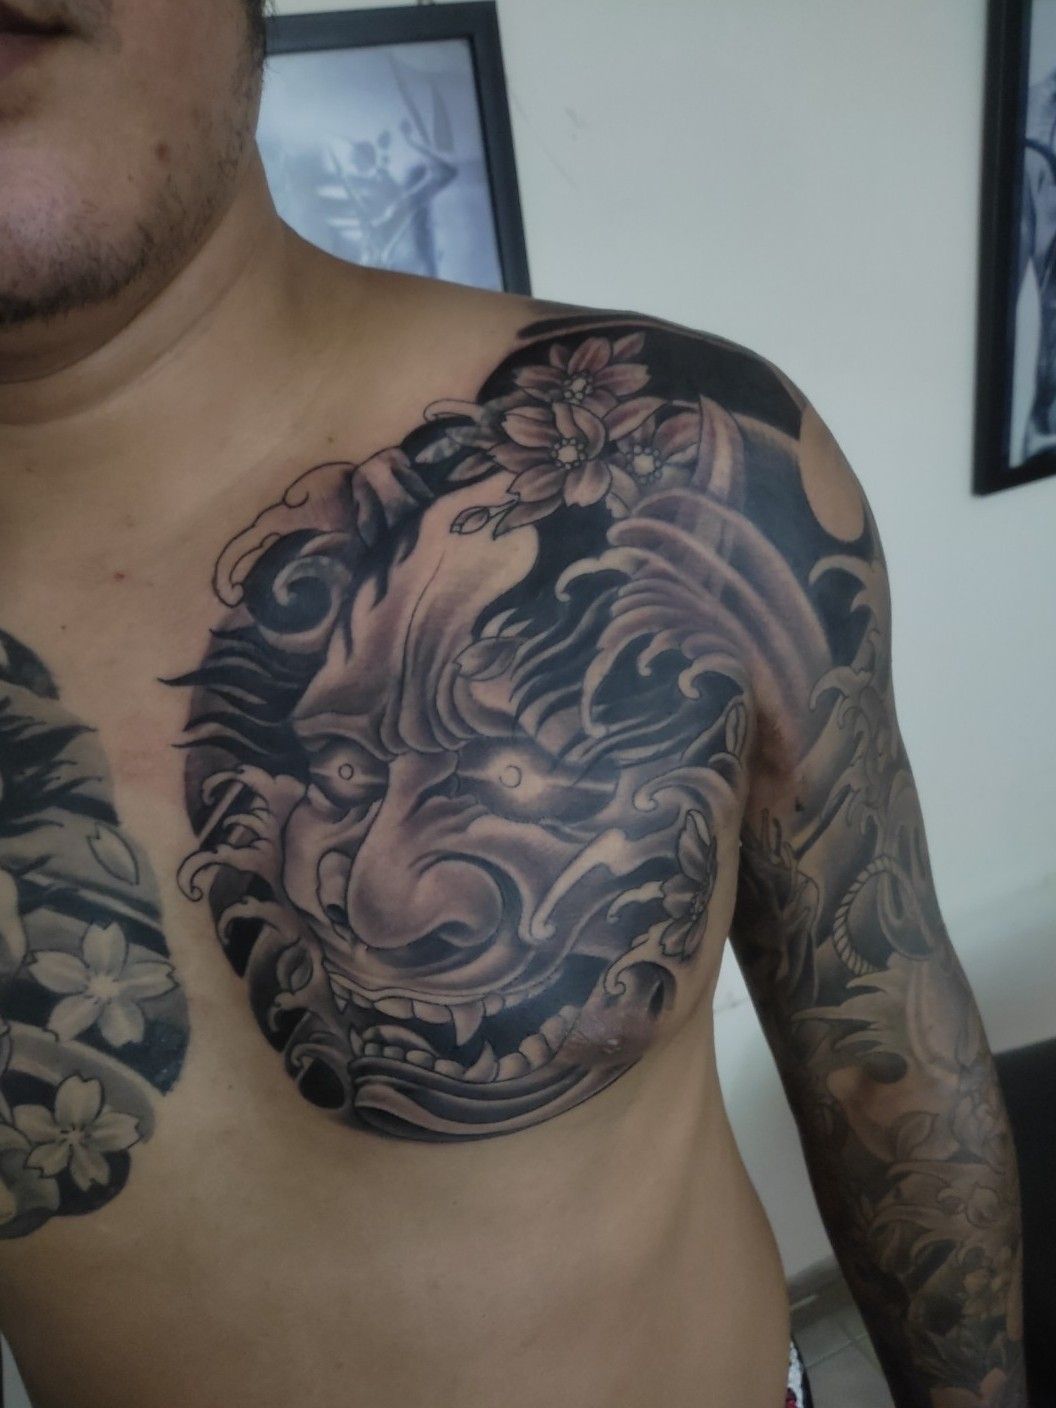 Experienced tattoo studios in Bangkok to get your next tattoo | Thaiger